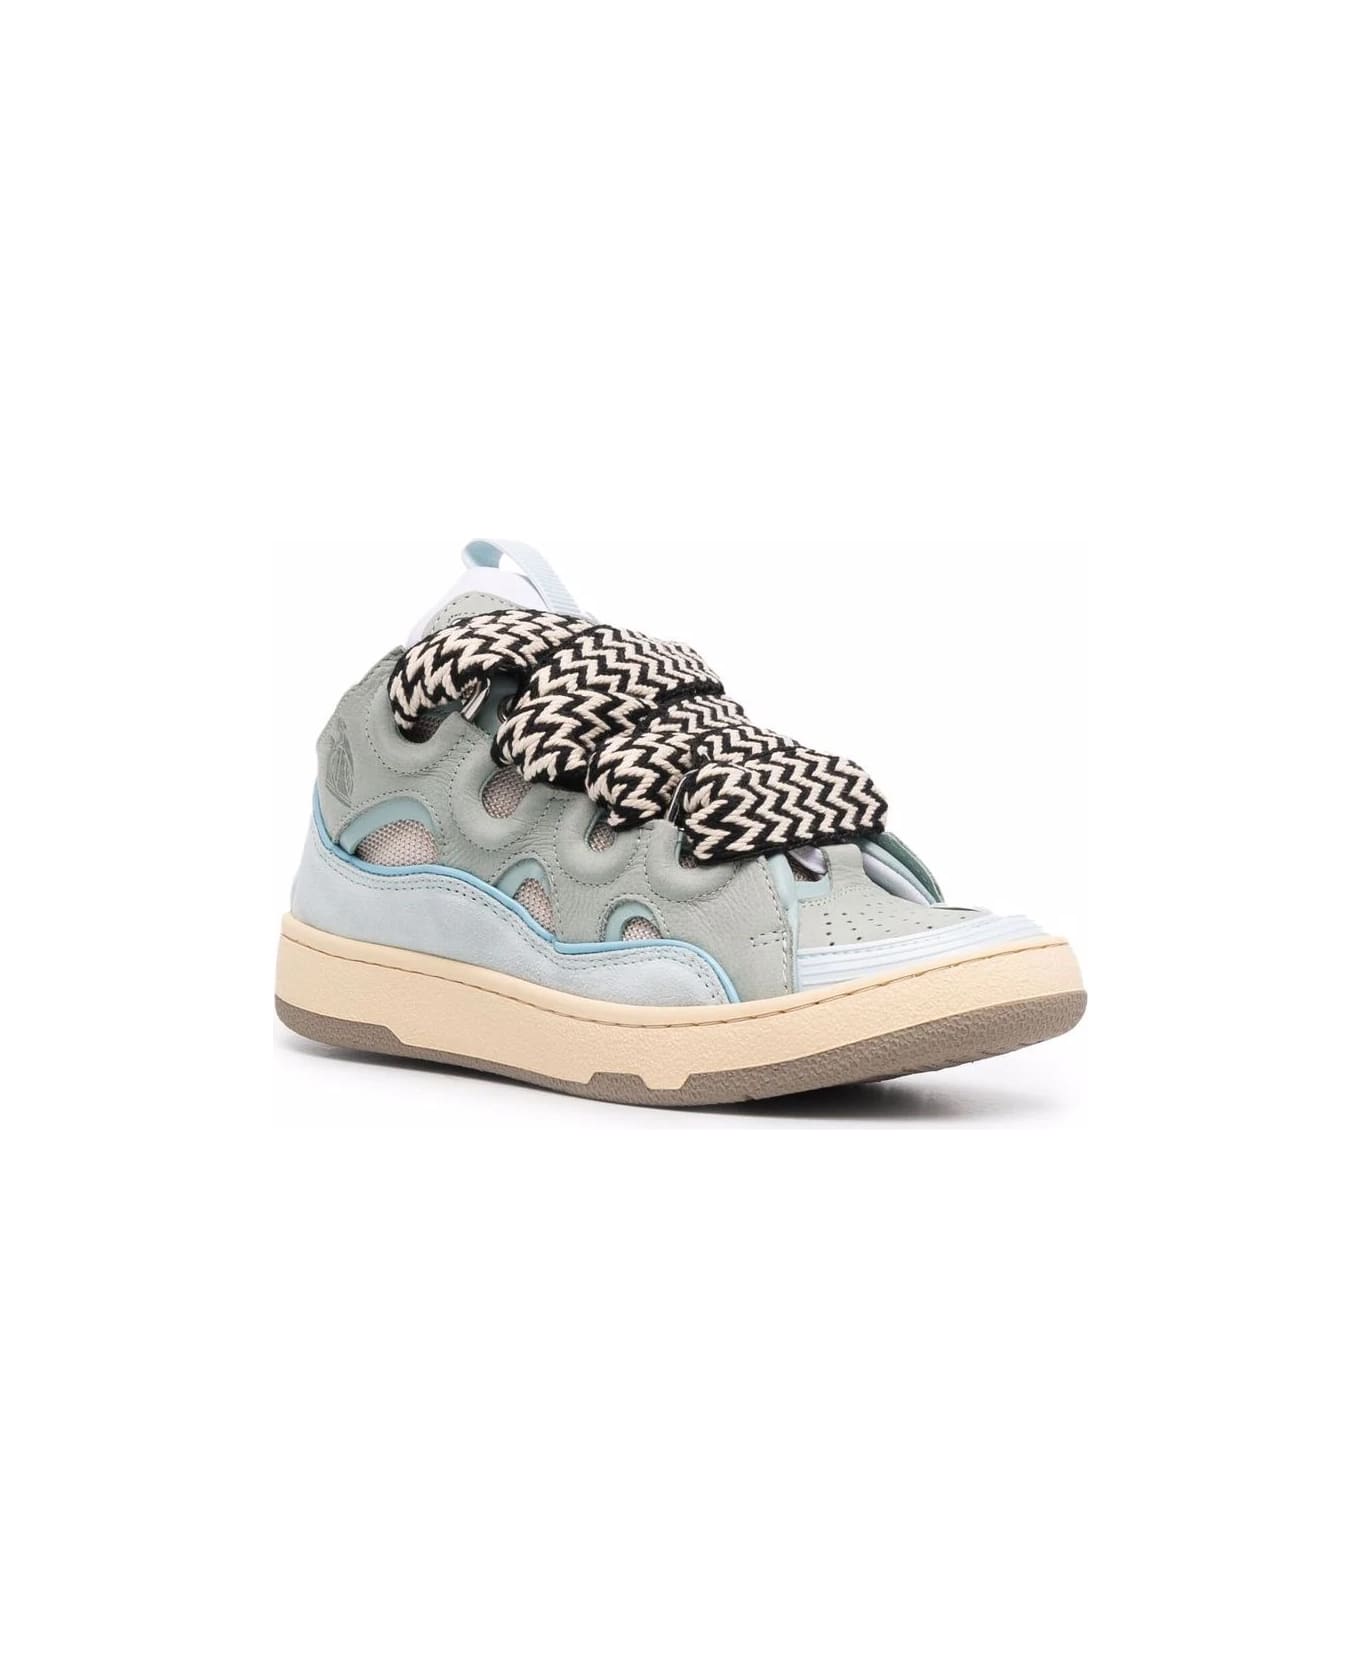 Lanvin Curb Sneakers In Light Blue Leather - Blue スニーカー